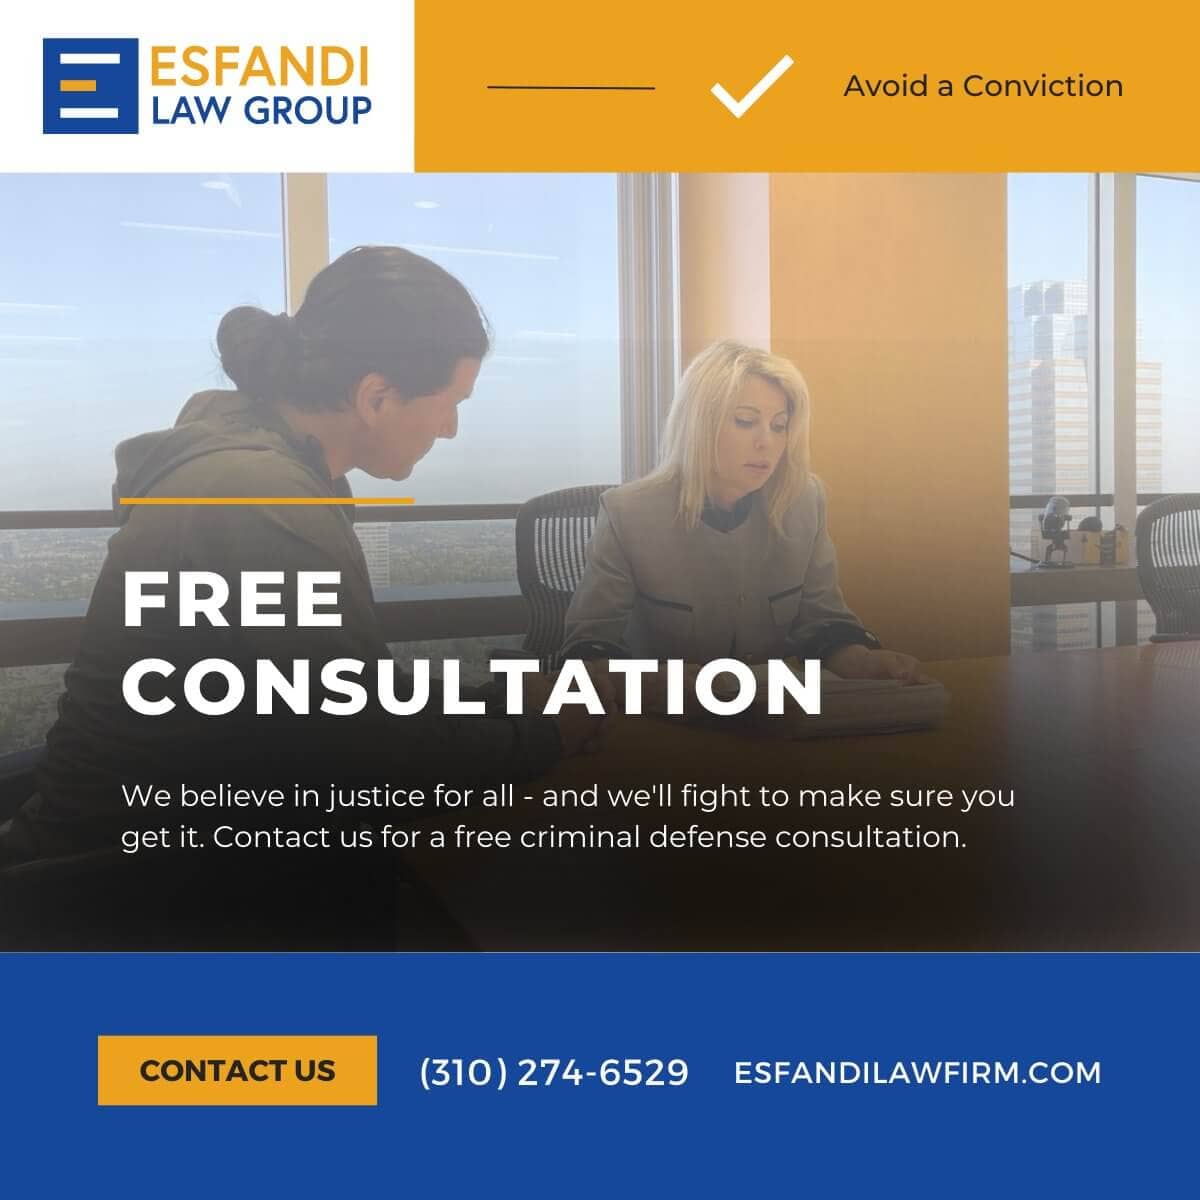 Free Consultation - Just Call 310-274-6529